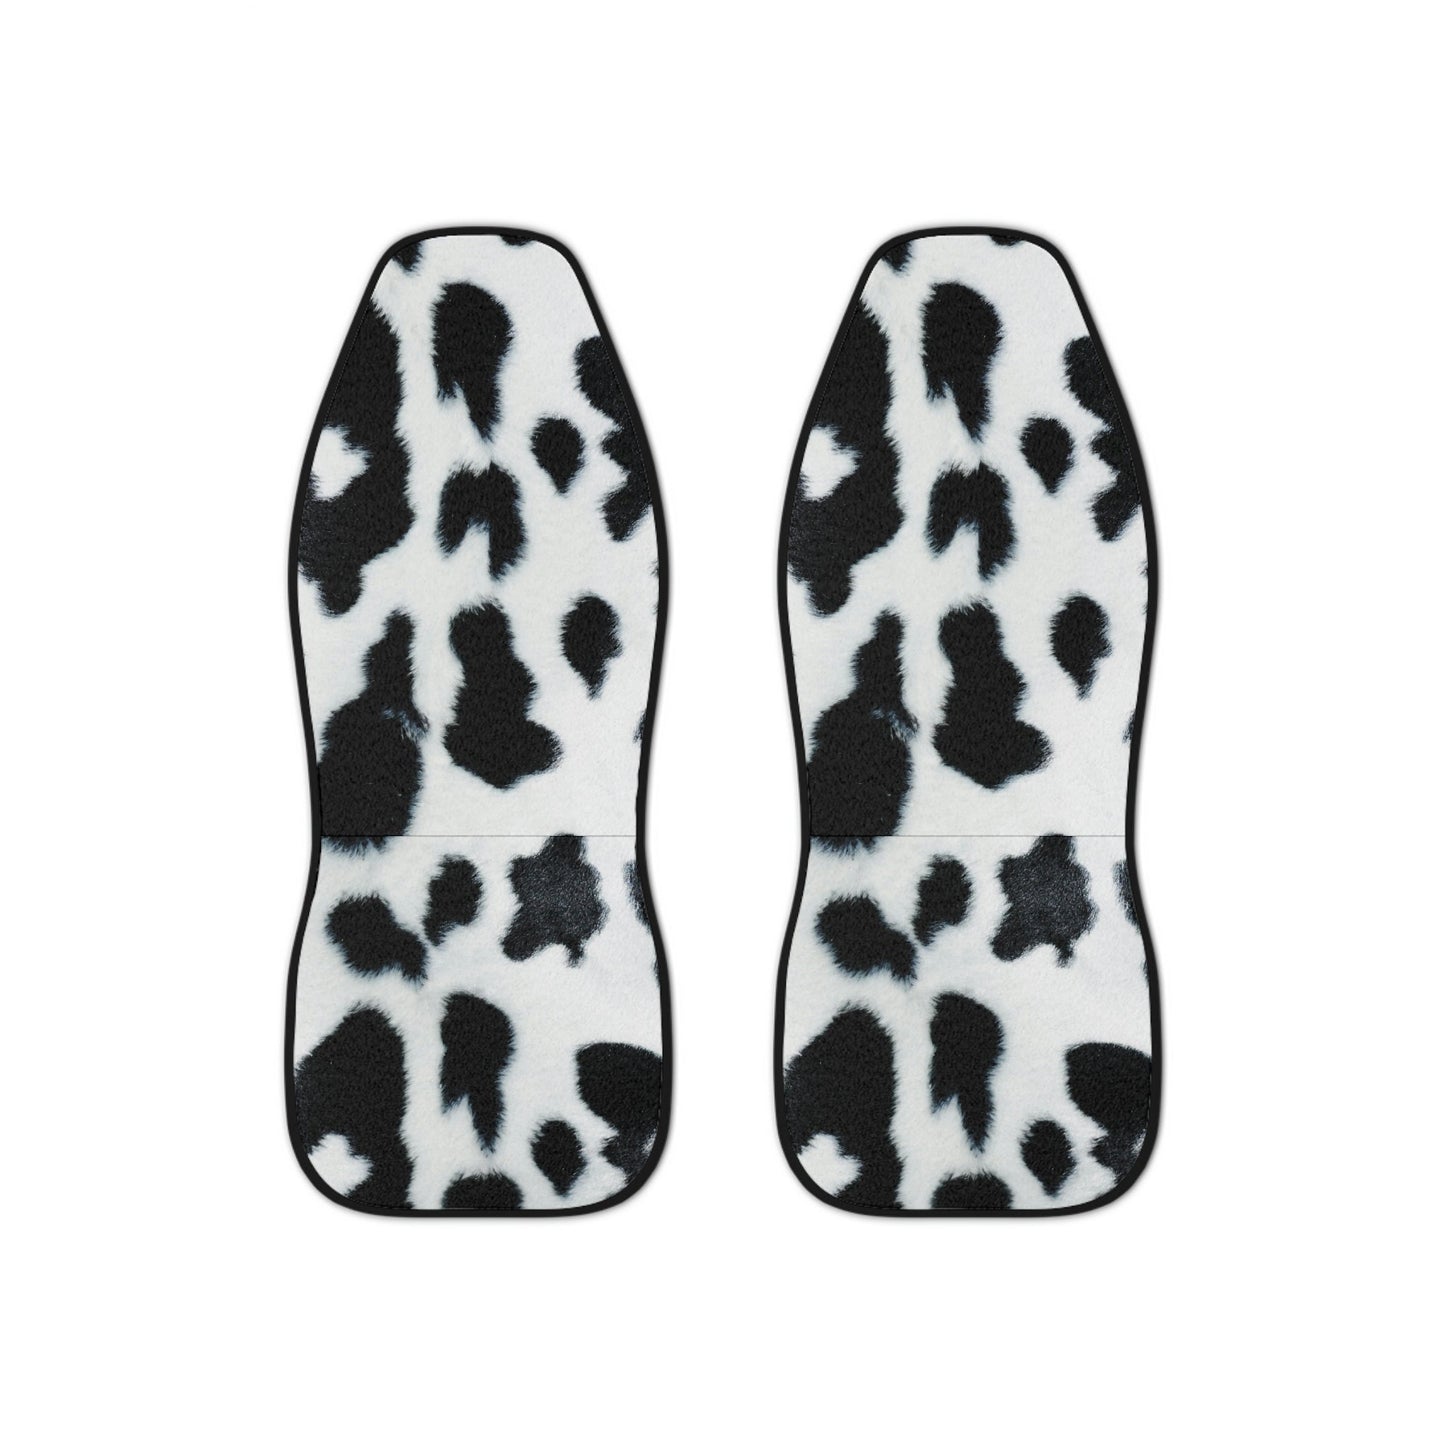 Cow Print Seat Covers for Car, Animal Print Car Seat Cover